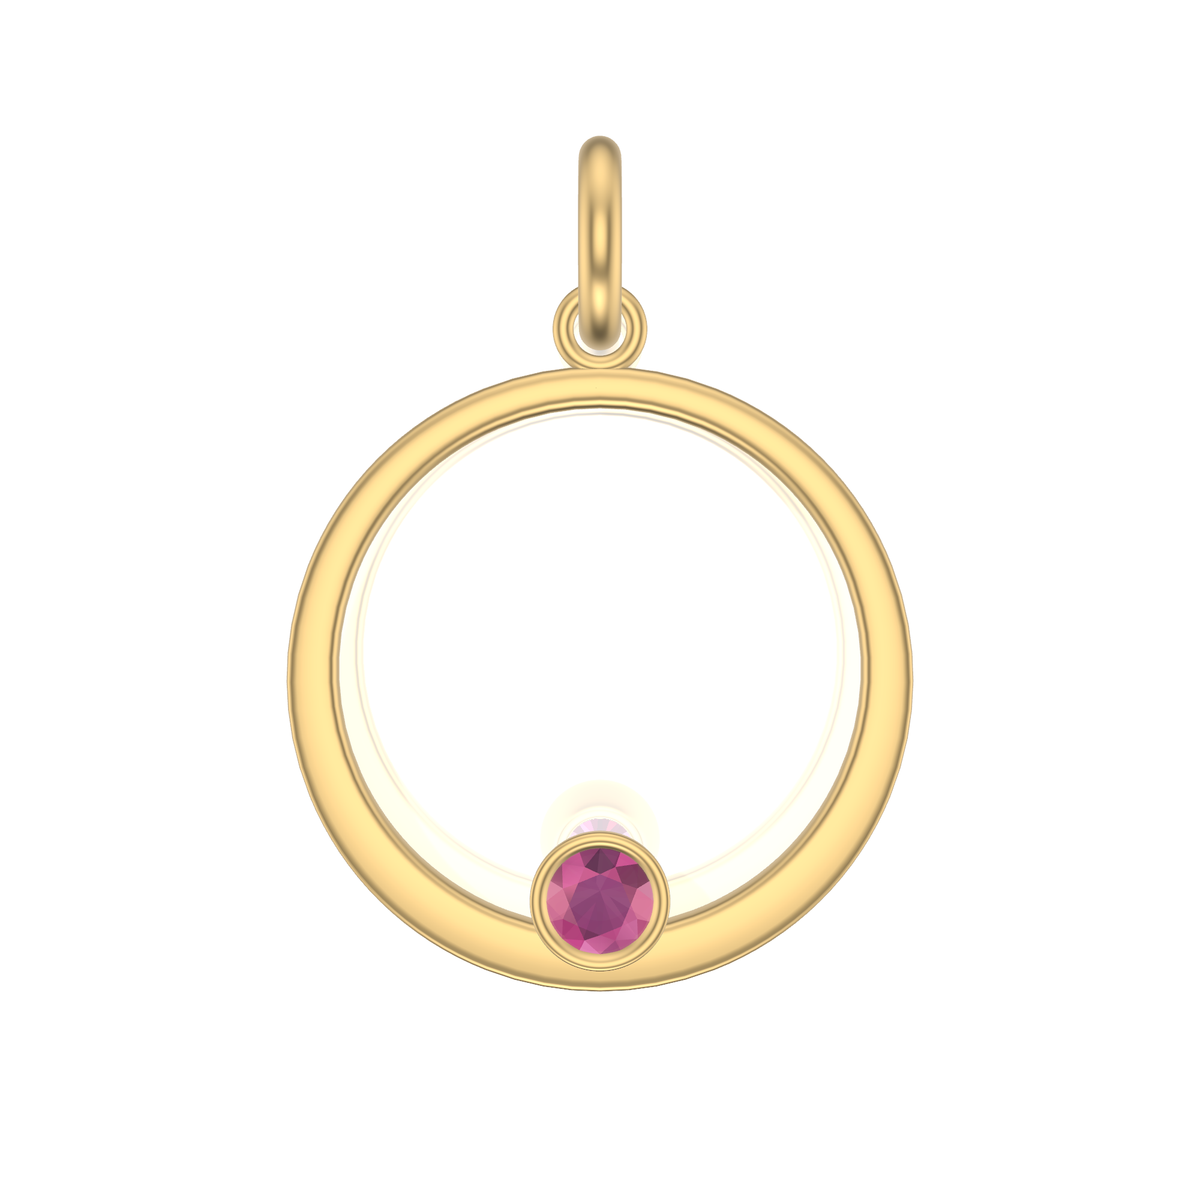 Mothers Circle Framed Charm | Gold Pendant, Large | Choose Your Metal And Gemstones